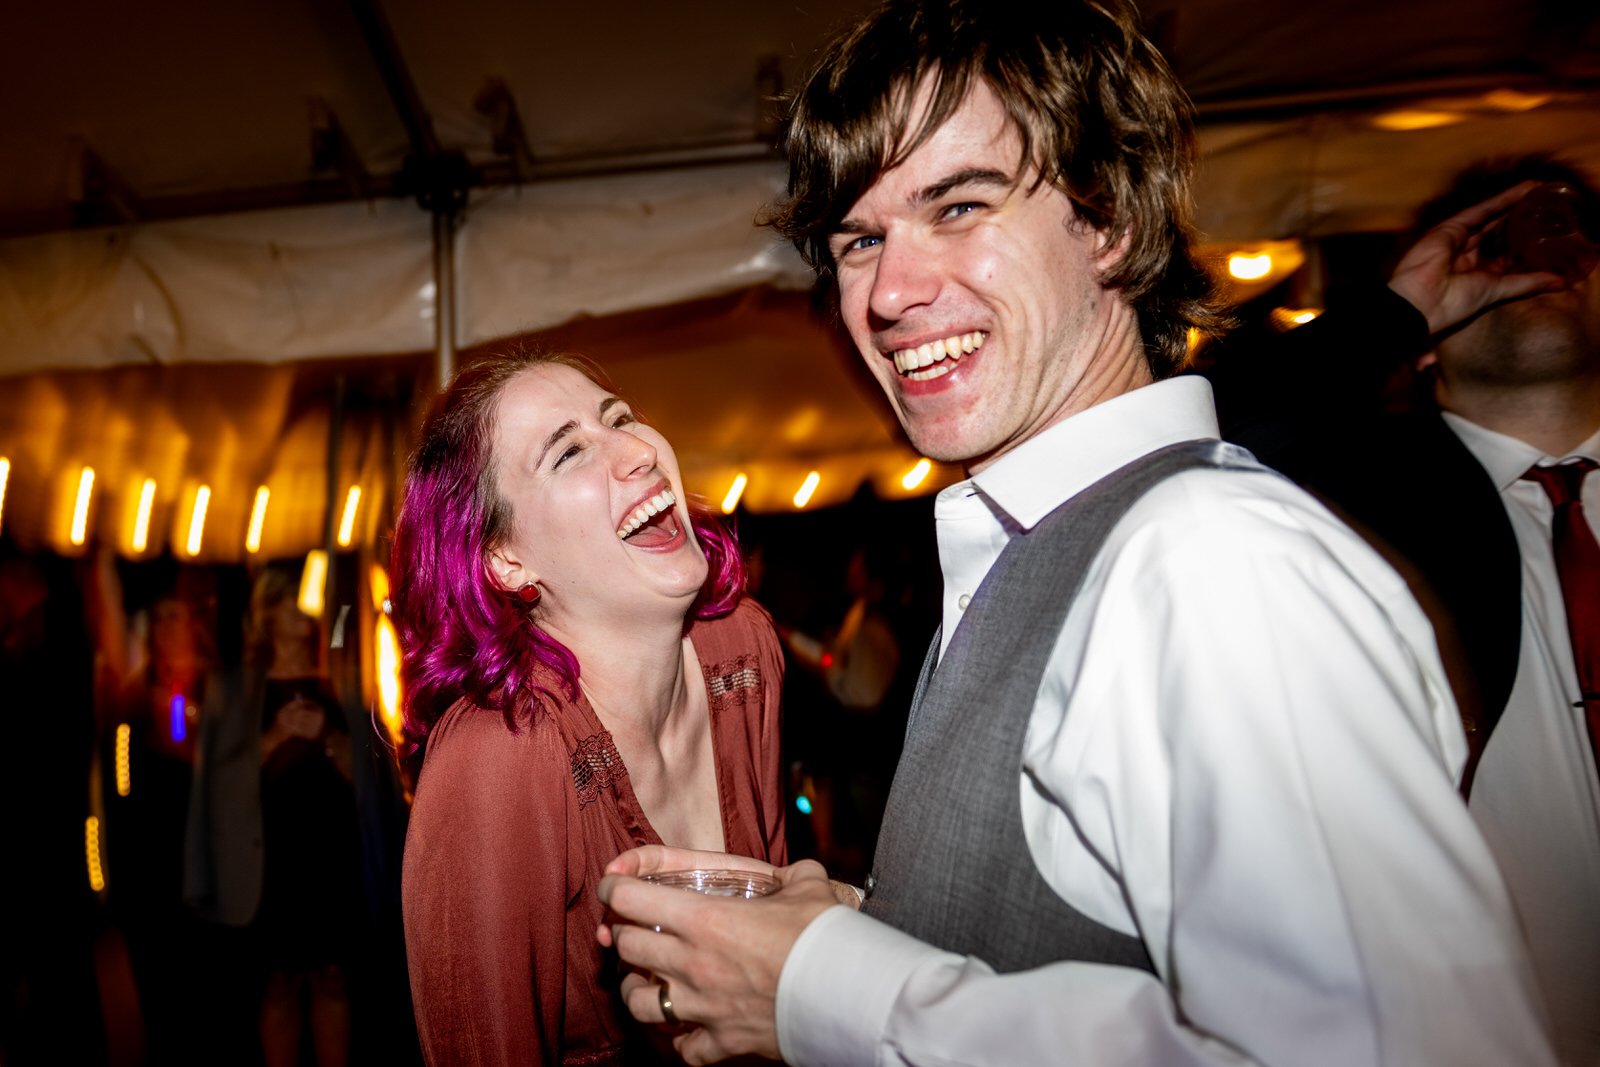 Ampersea_Baltimore_Maryland_Wedding_Suzanne&Andrew_Dance_Party-1110.jpg